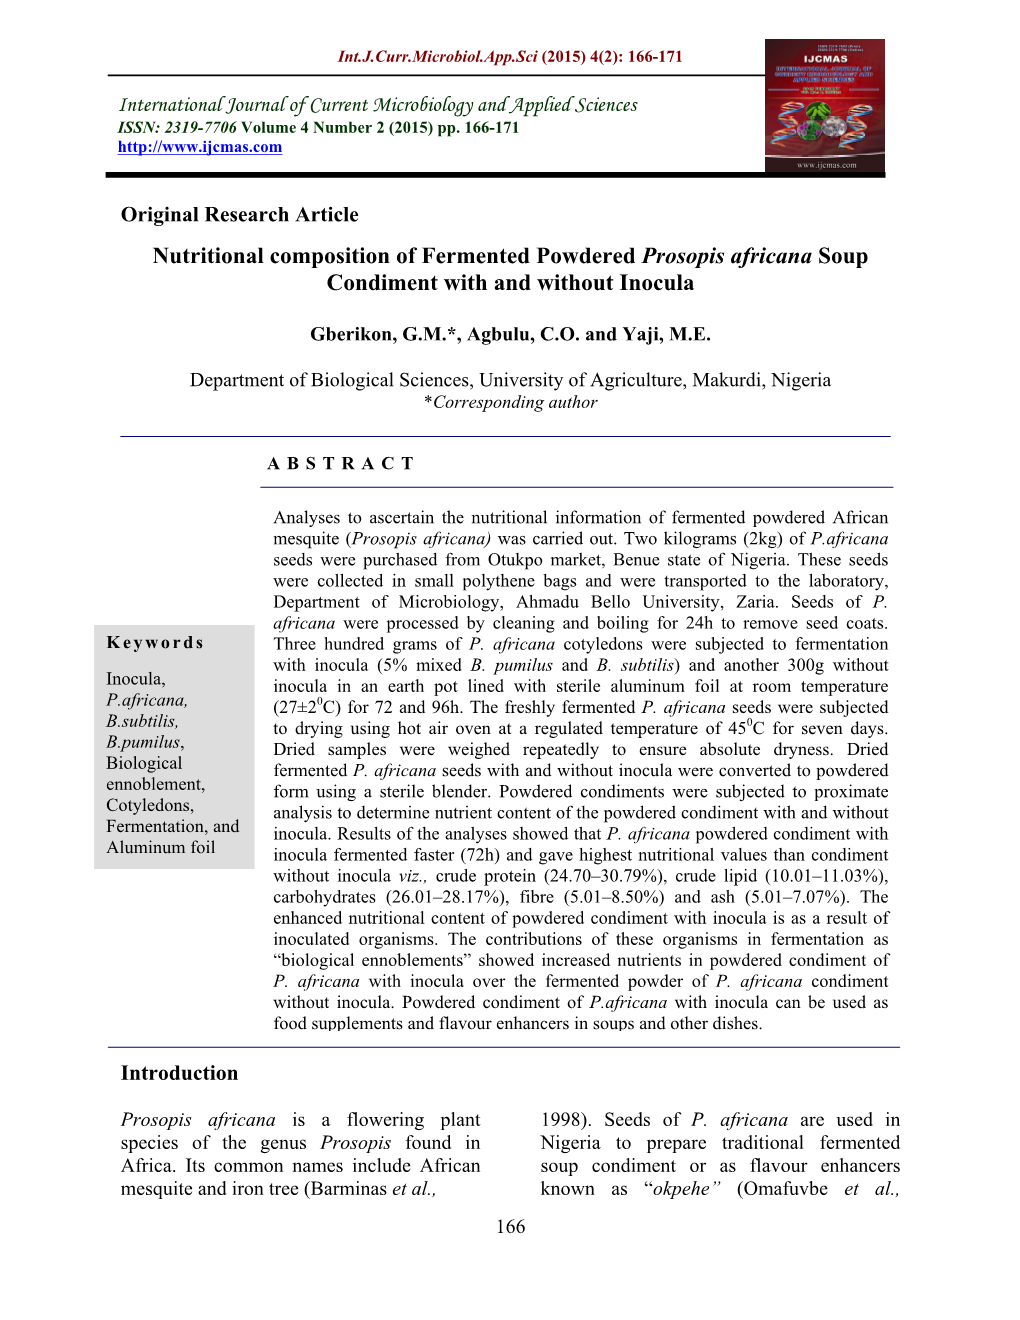 Nutritional Composition of Fermented Powdered Prosopis Africana Soup Condiment with and Without Inocula